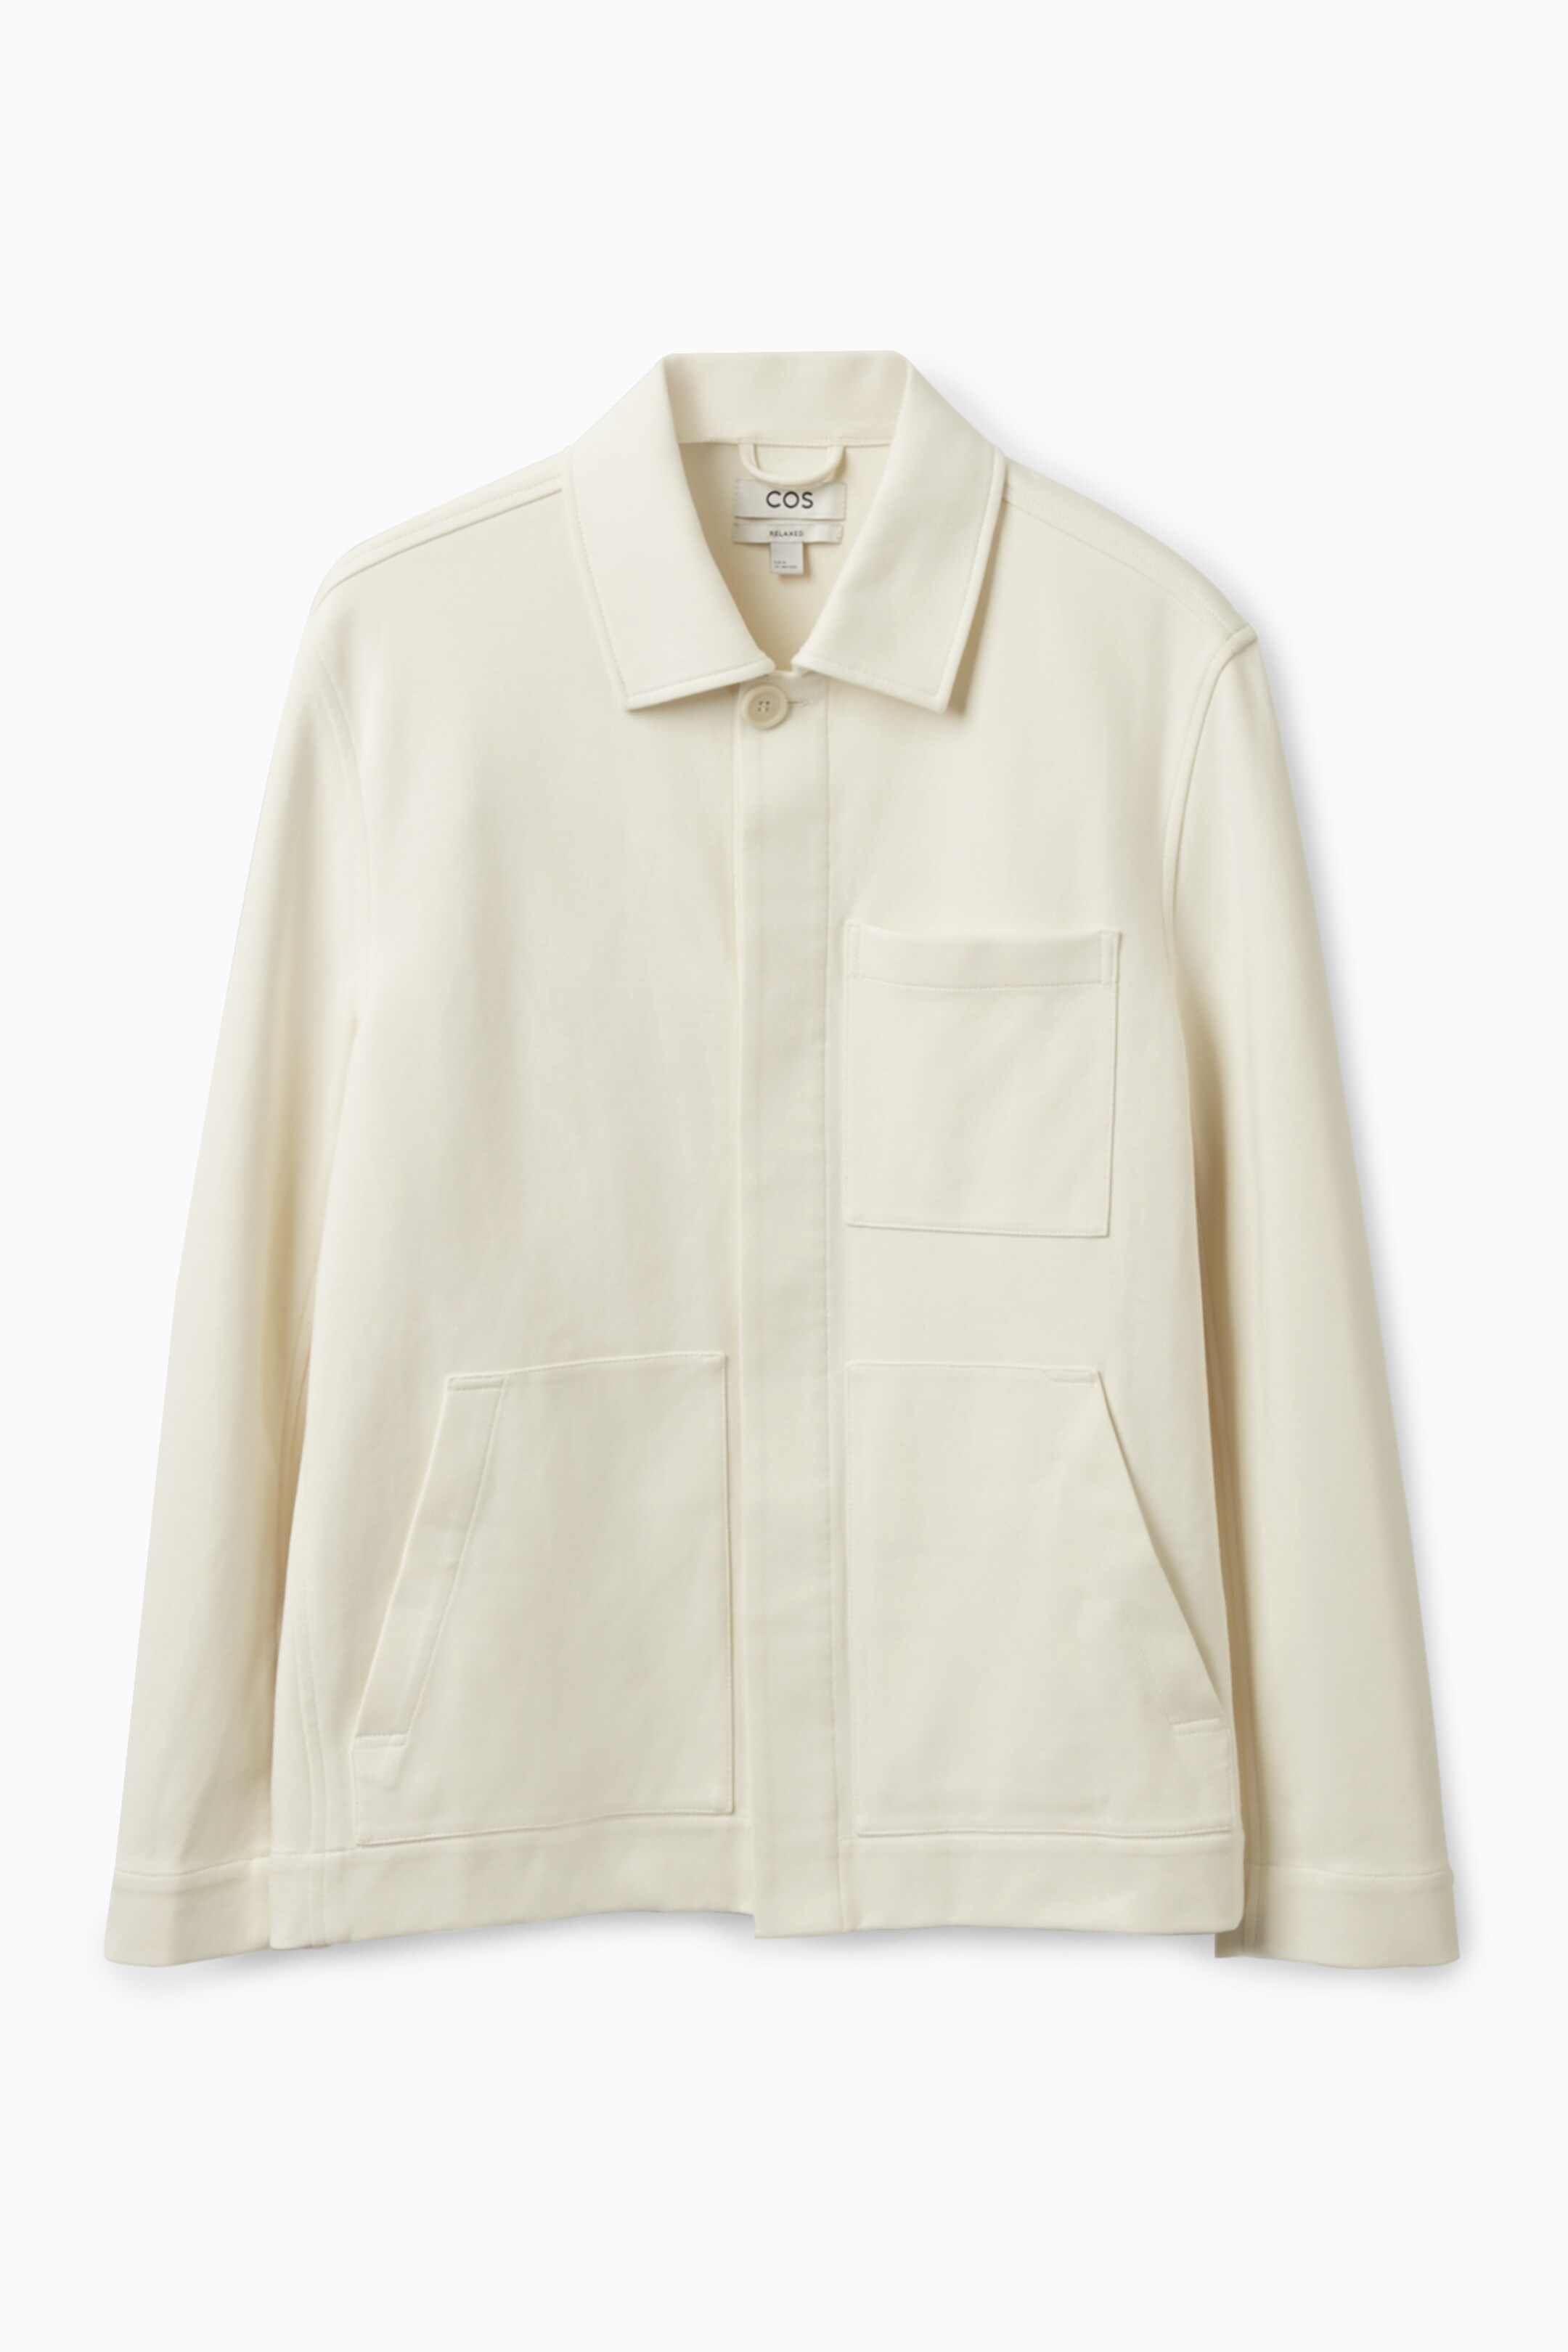 Front image of cos MINIMAL JERSEY JACKET in CREAM